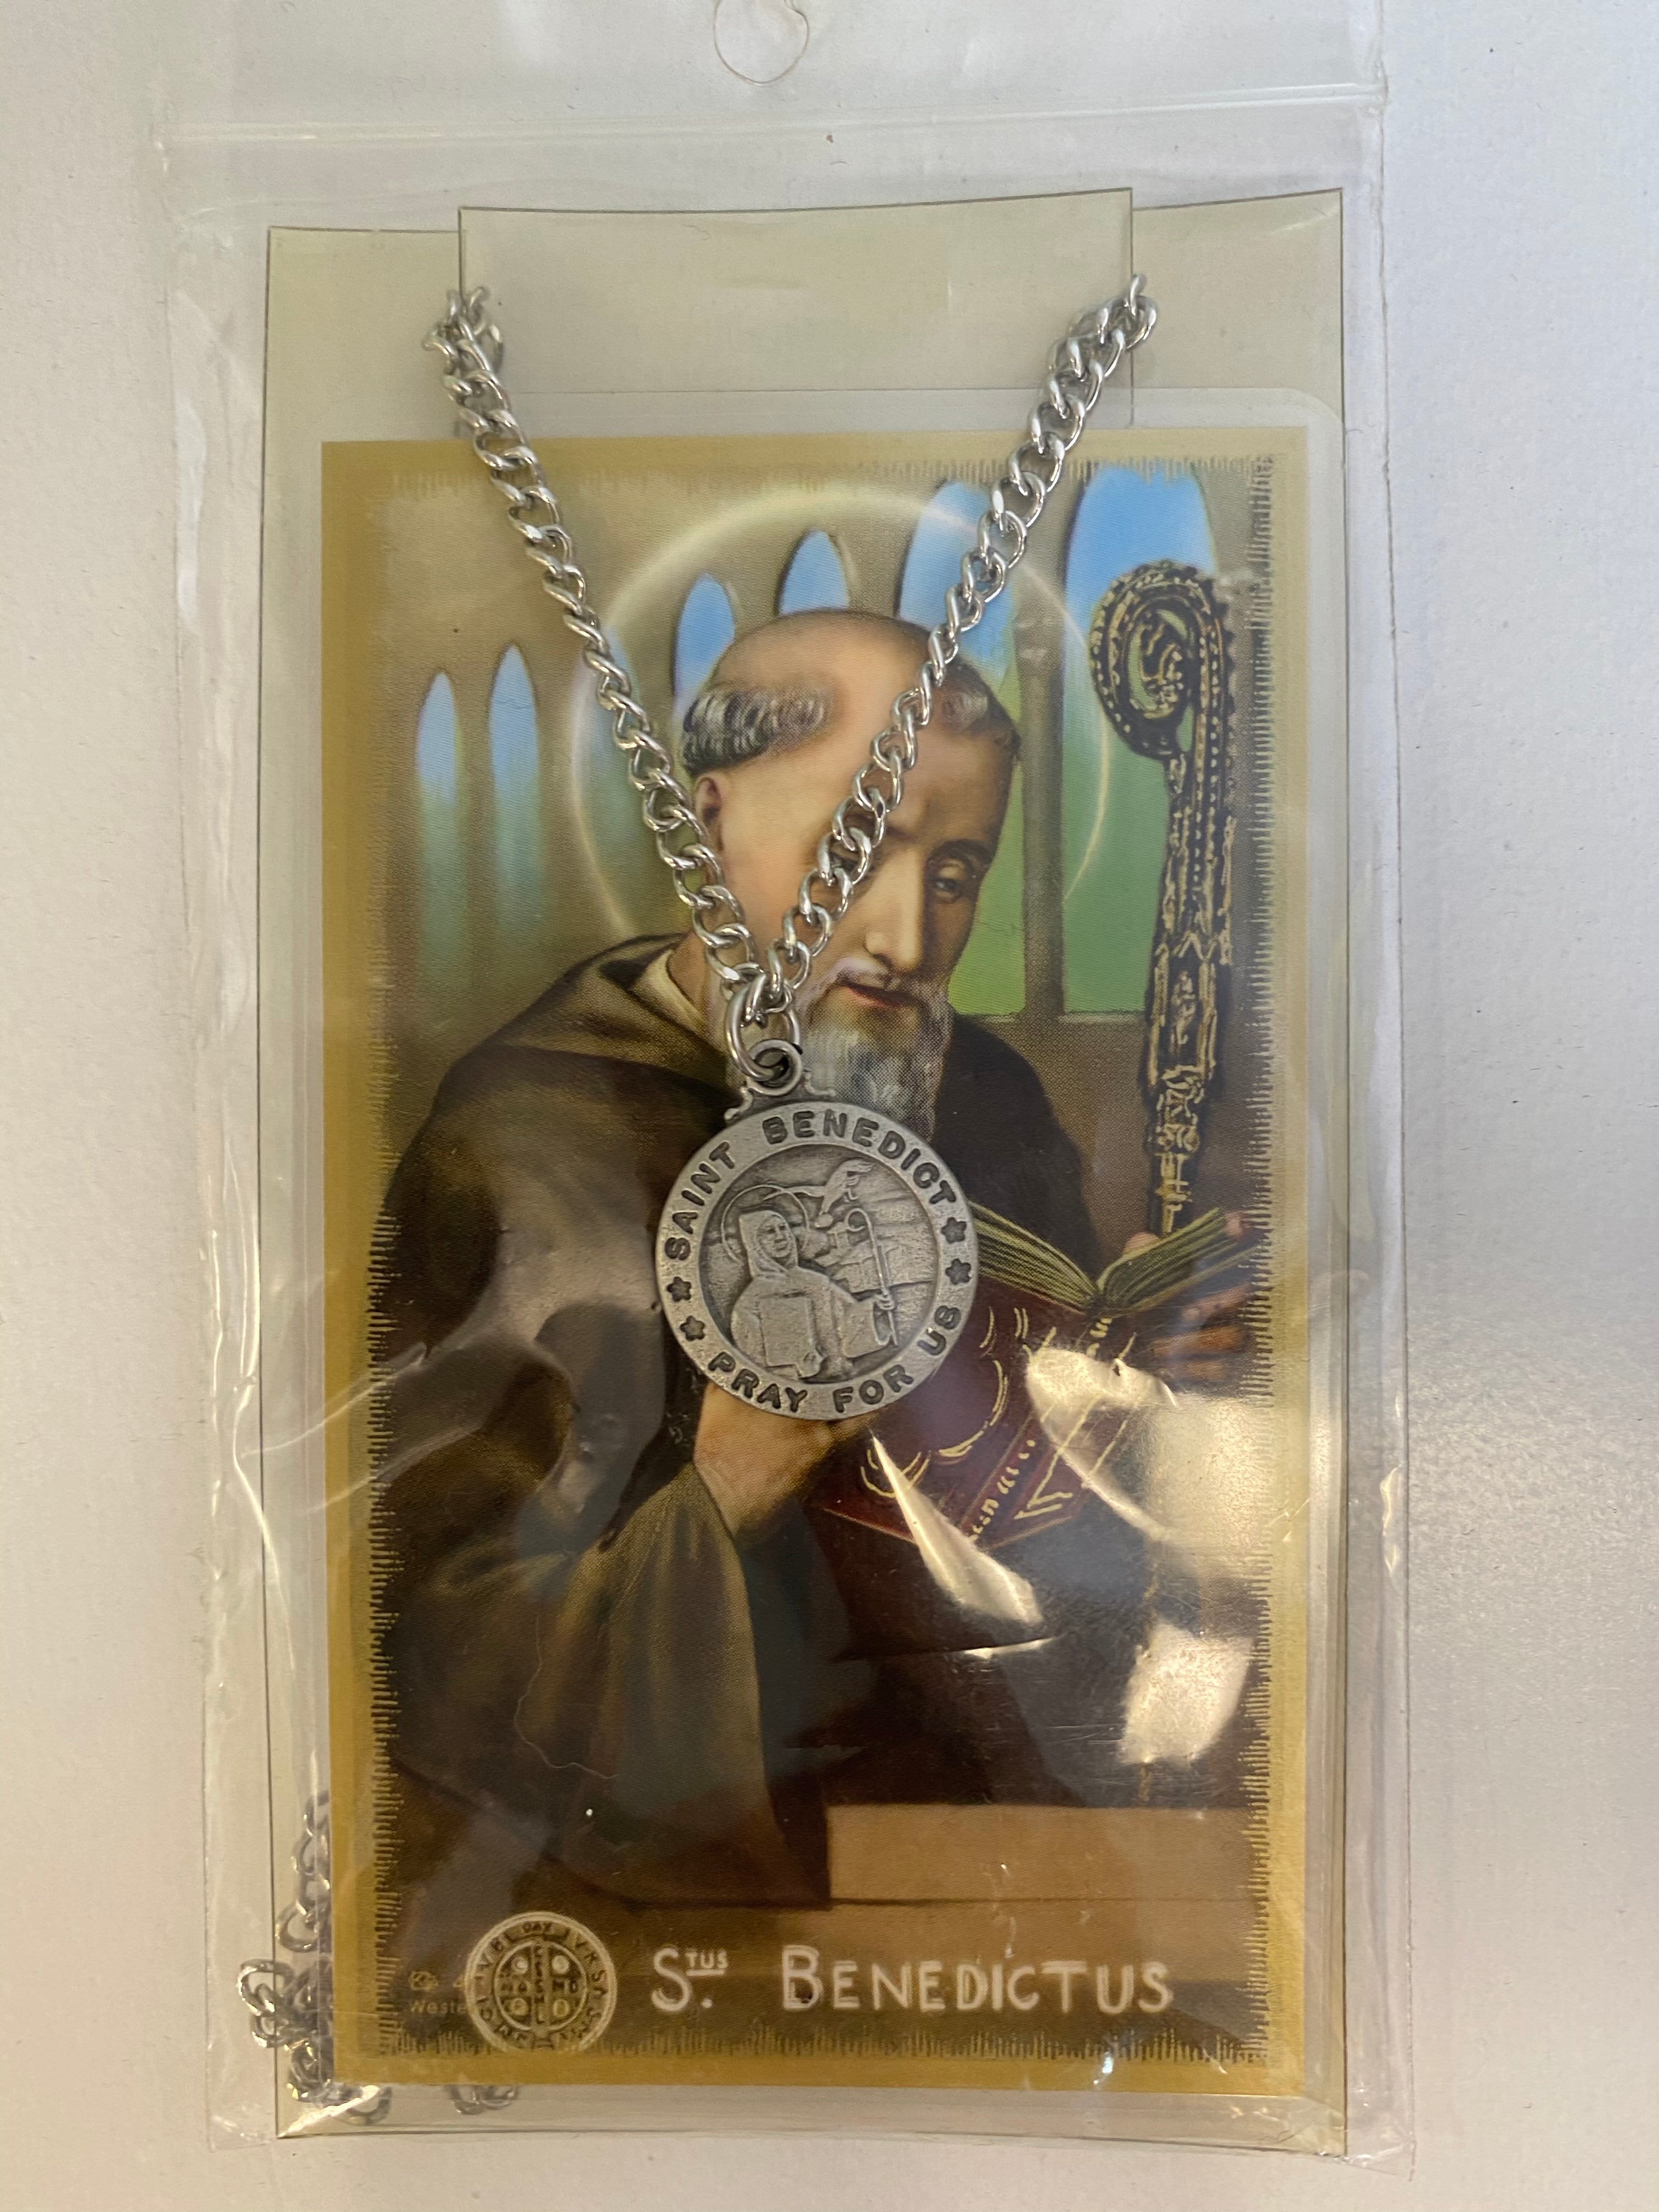 St. Benedictus medal with prayer card